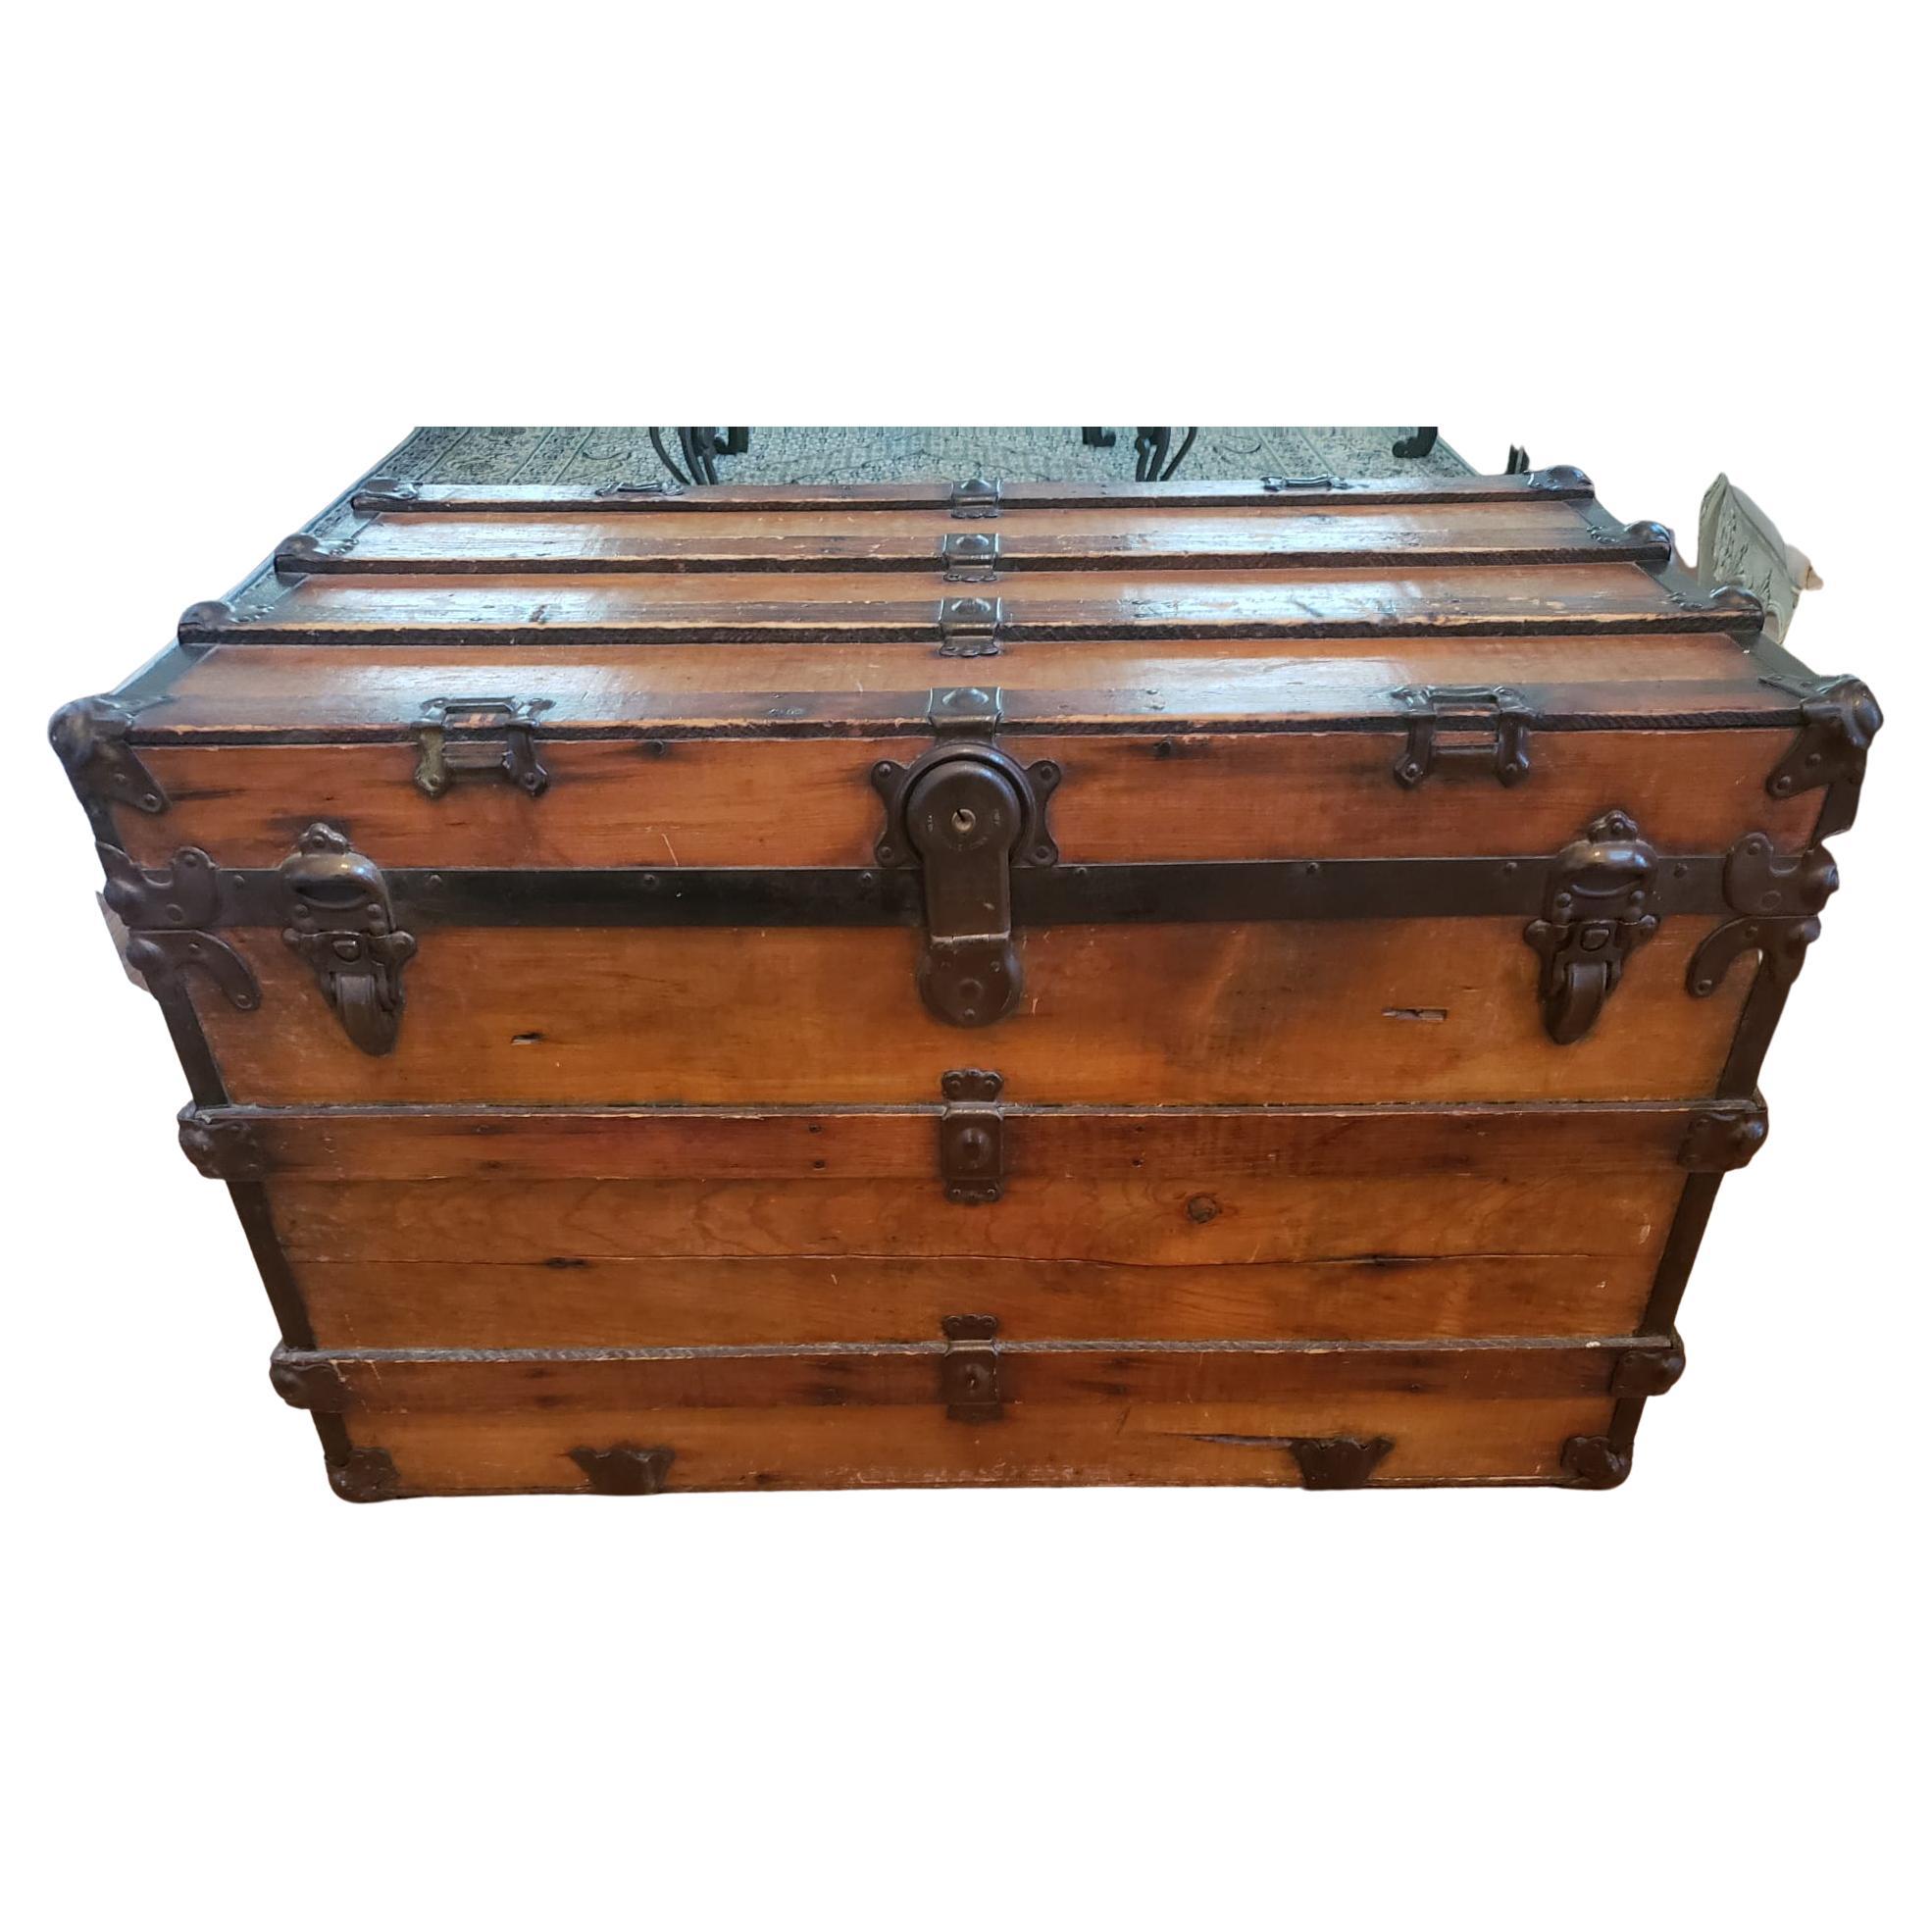 1930s American Classical Wooden and Steel Cedar Lined Trunk 1